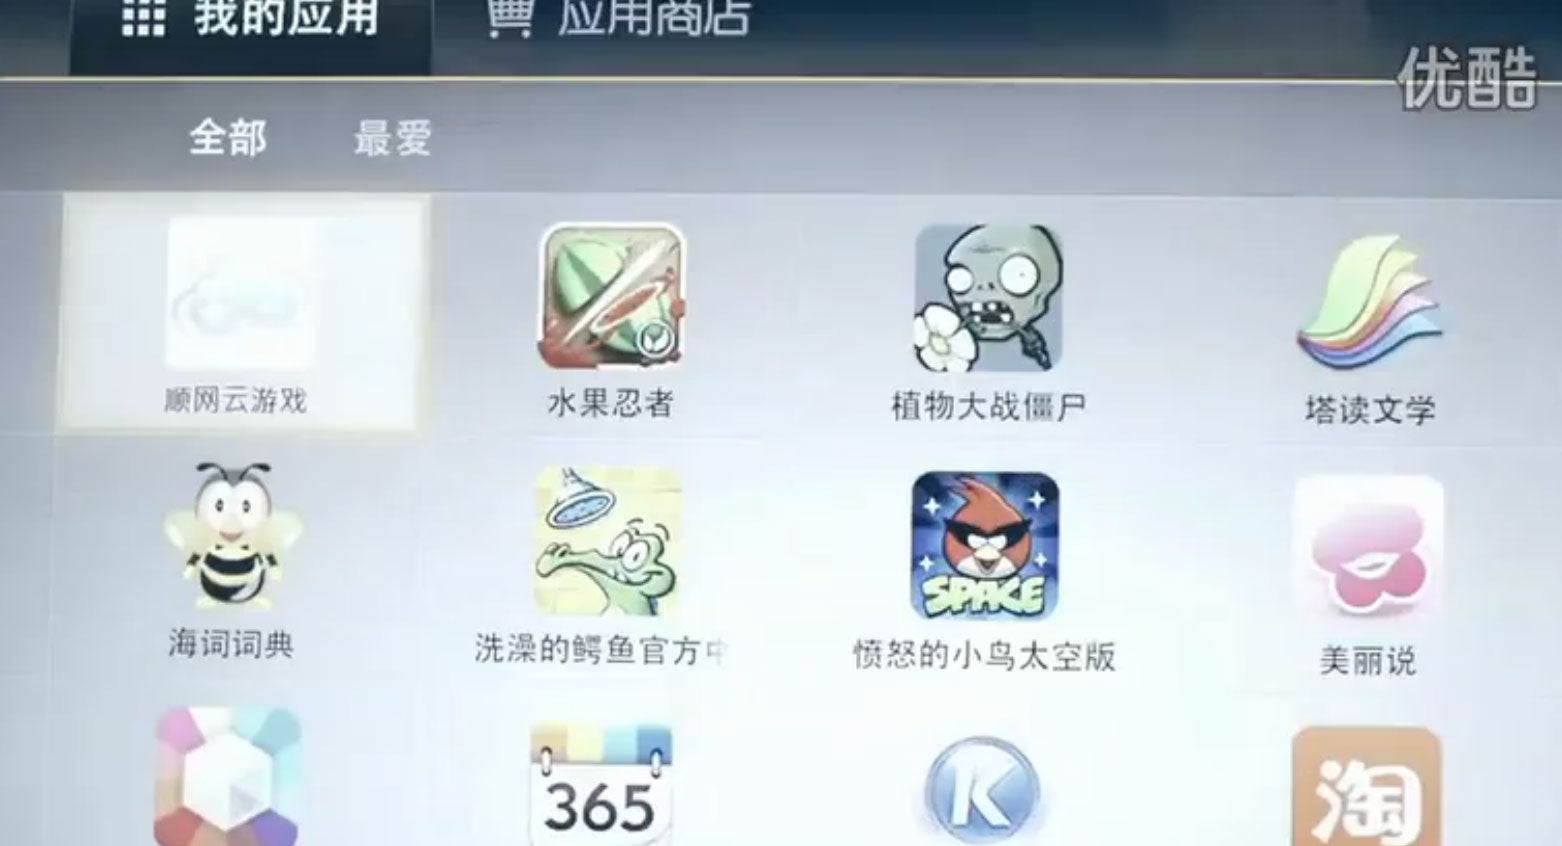 A still from the COS advert shows that the software is compatible with many popular apps - including Fruit Ninja and Angry Birds.